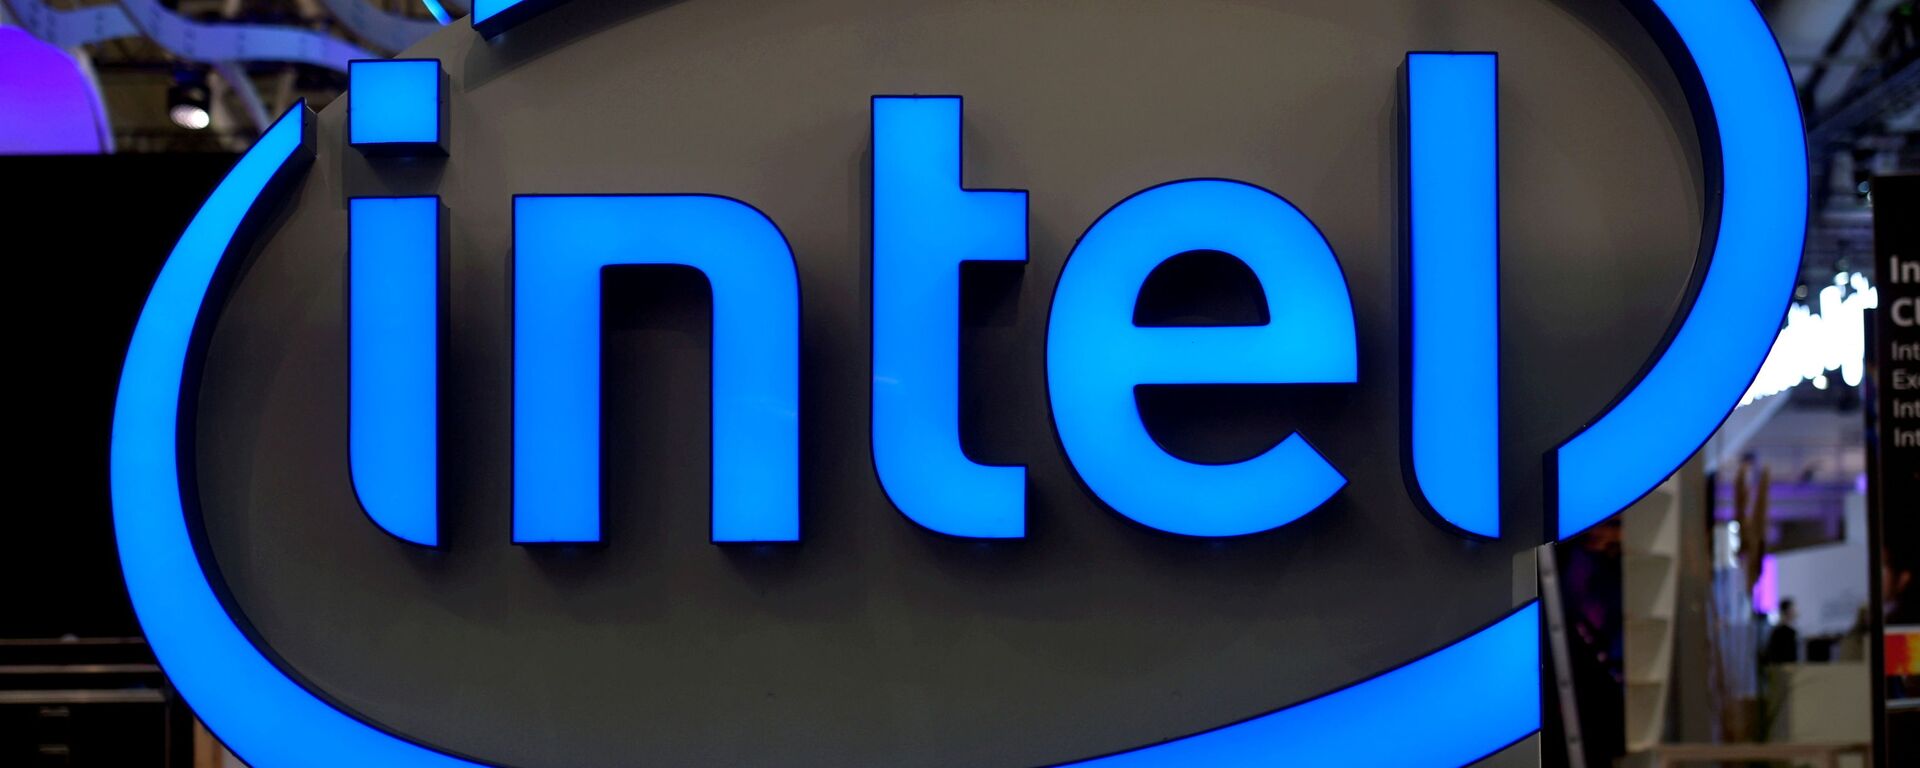 Intel's logo is pictured during preparations at the CeBit computer fair, which will open its doors to the public on March 20, at the fairground in Hanover, Germany, March 19, 2017 - Sputnik International, 1920, 01.06.2021